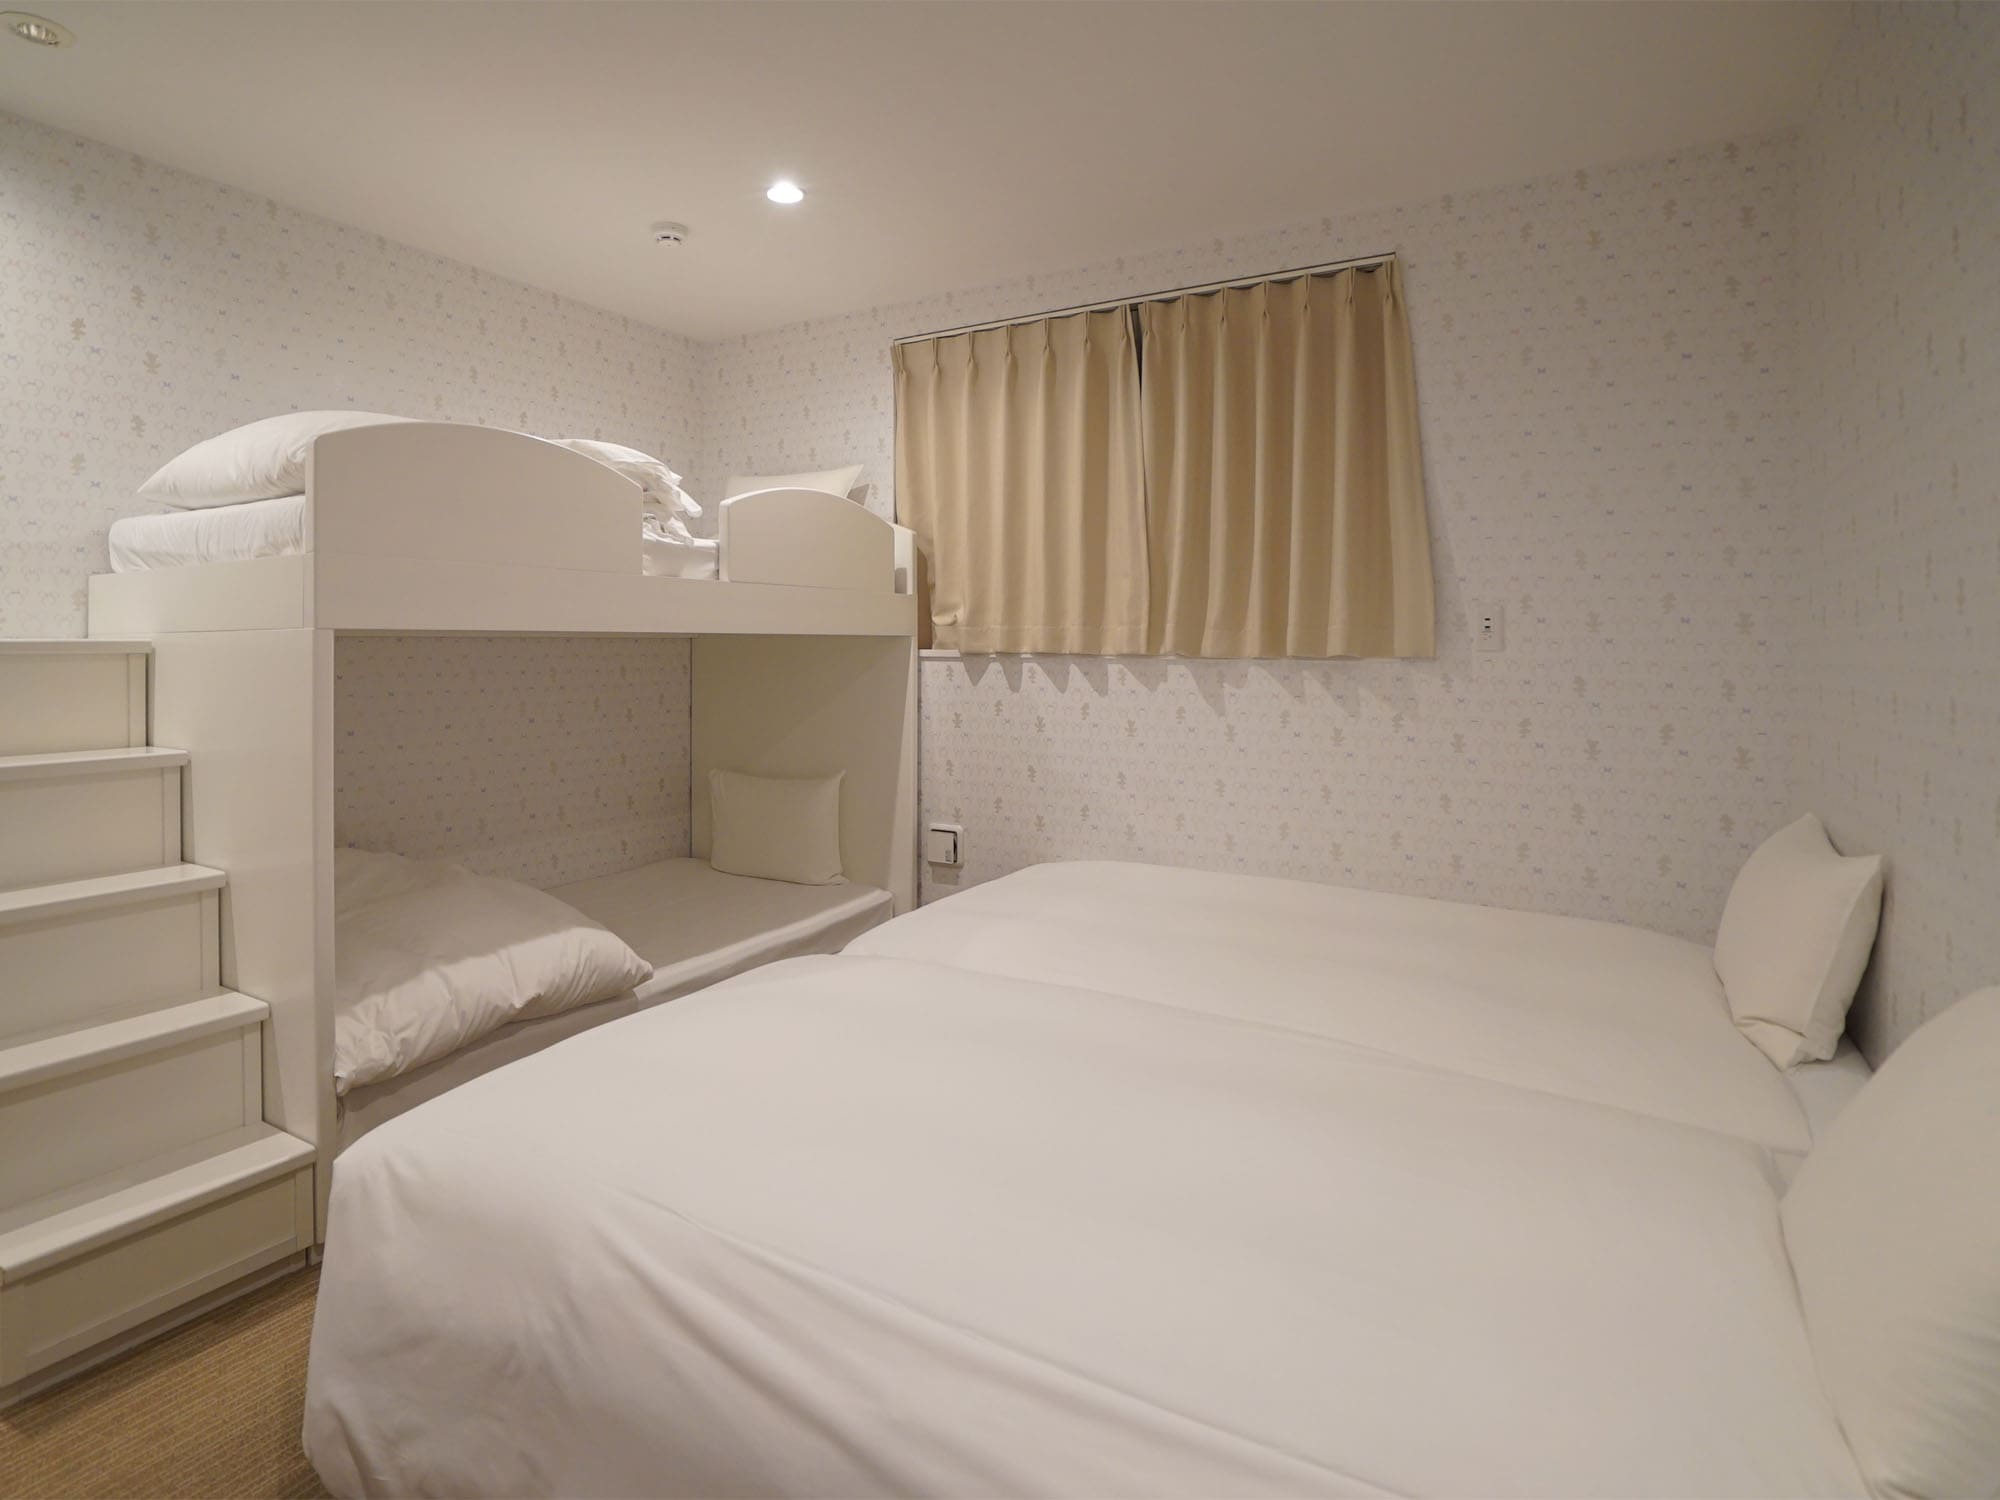 Family room 20.8㎡ featuring bunk beds, up to 4 adults can be reserved